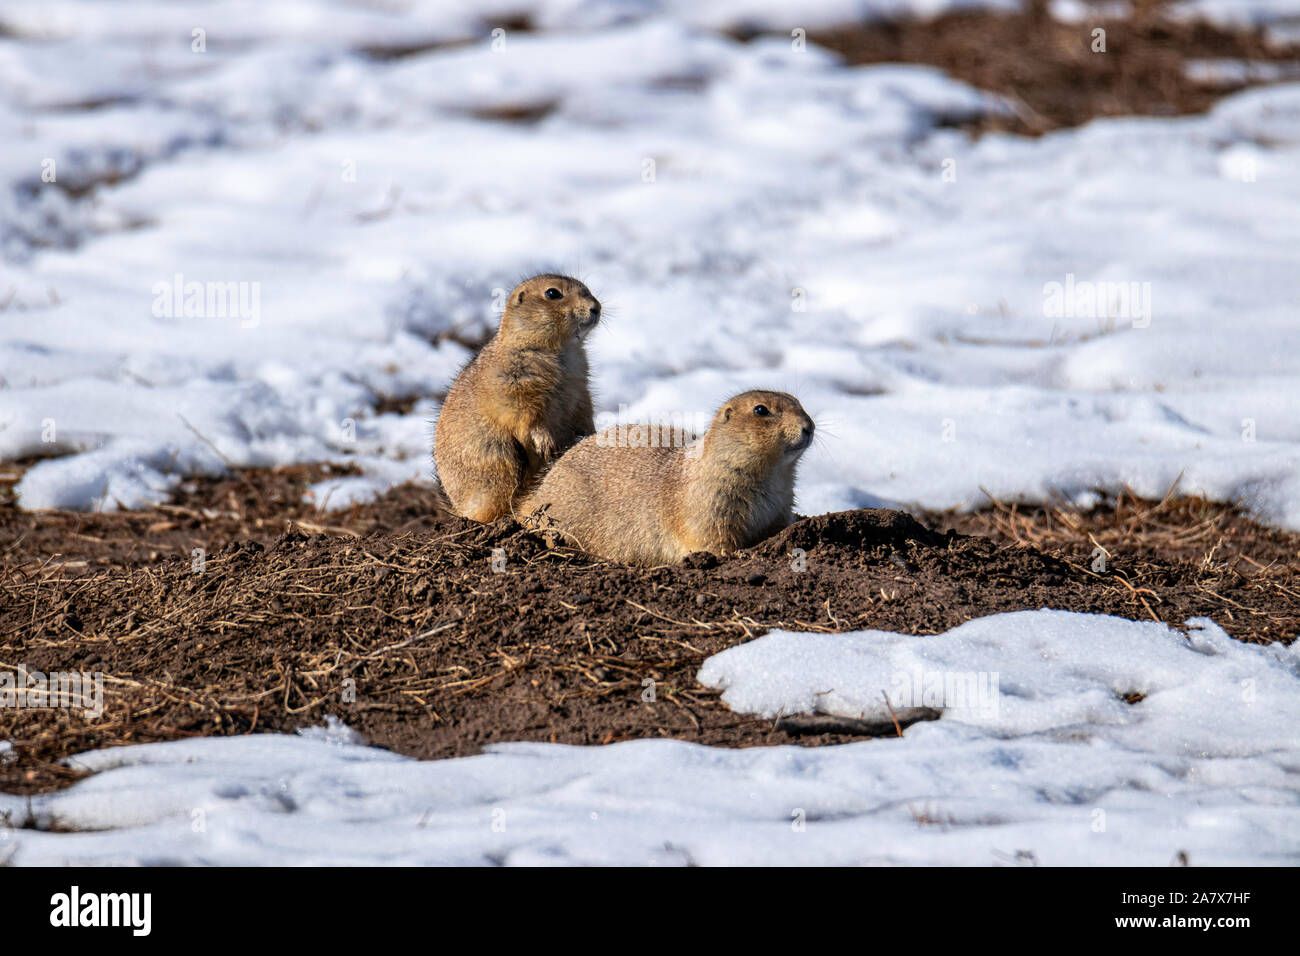 Black Tailed Prairie Dog (Cynomys ludovicianus) very commonly known to carry the plague, Rocky Mountain Arsenal Wildlife Refuge Colorado,USA Stock Photo